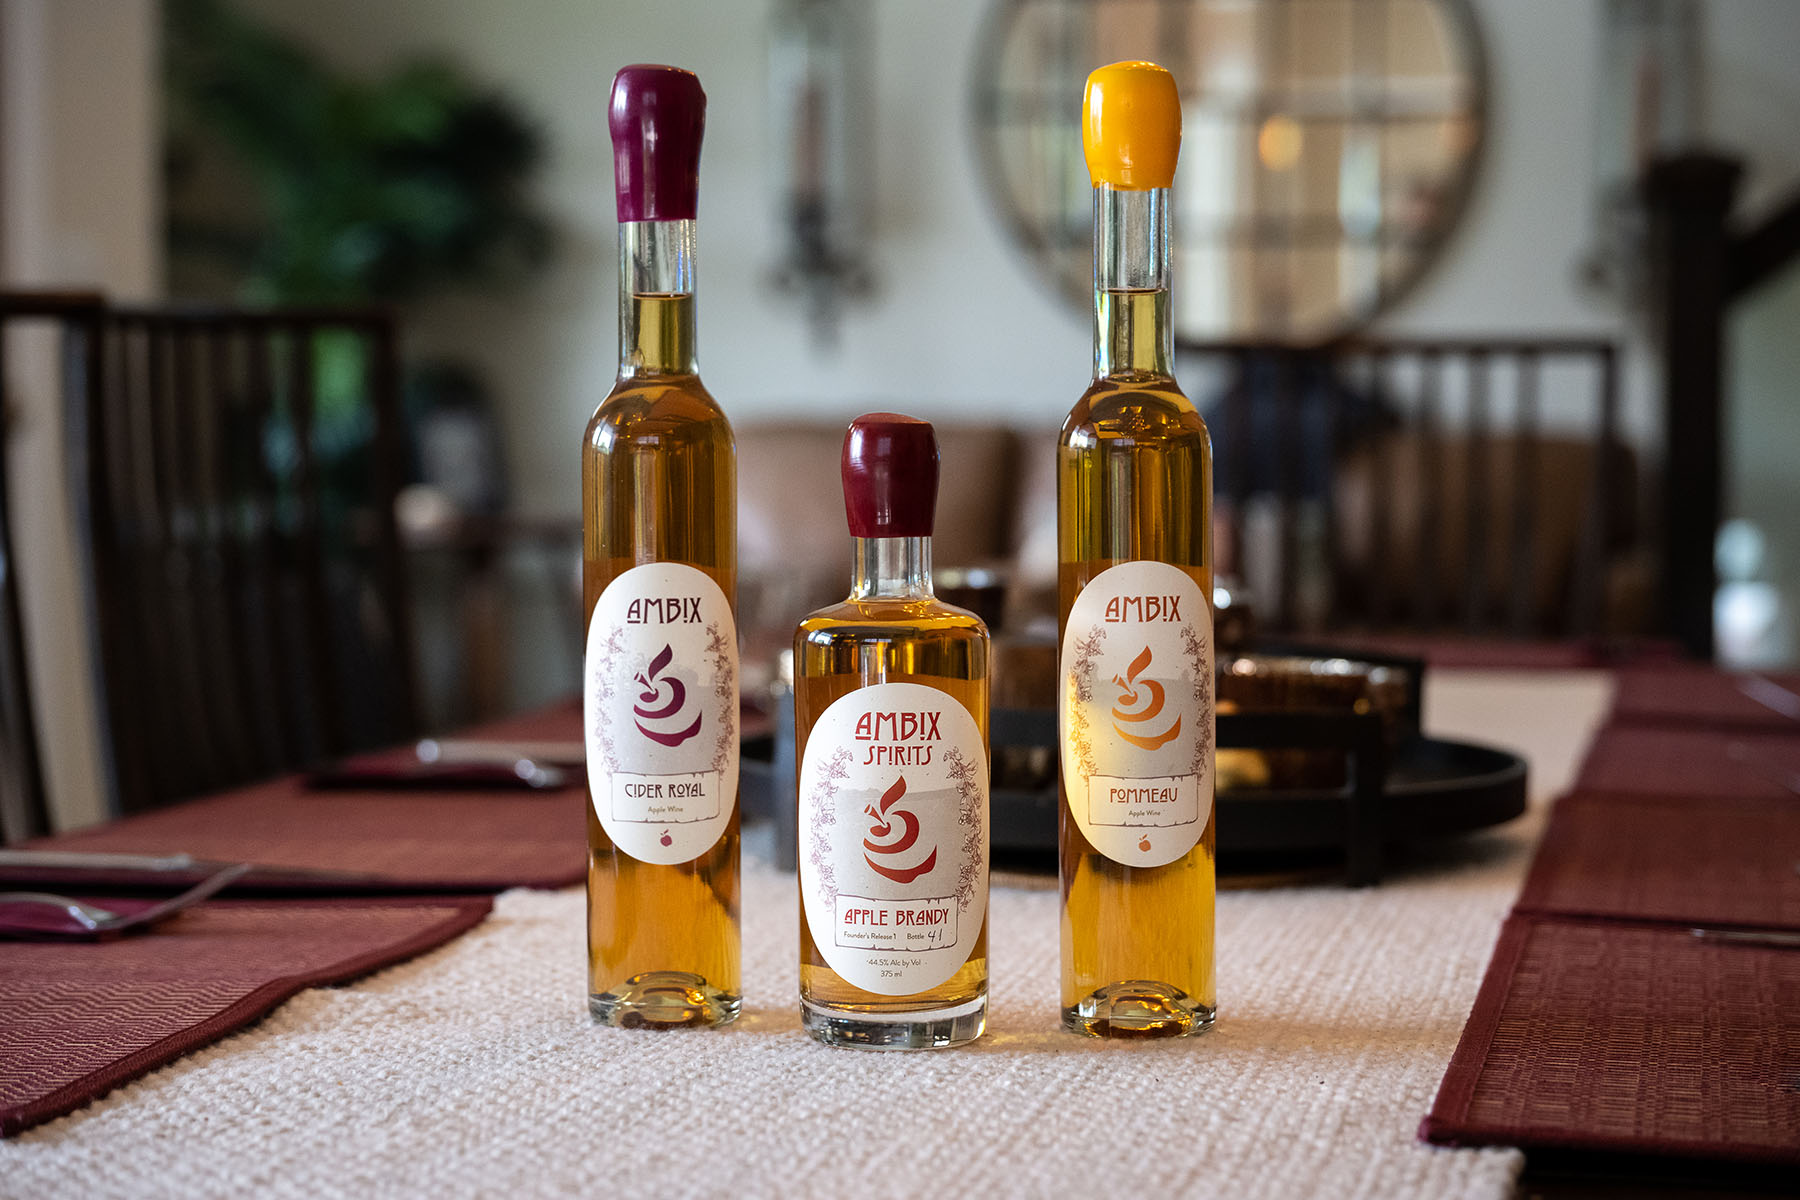 Three Ambix Spirits products: Pommeau, Apple Brandy, and Cider Royal, being showcased on a dining table.